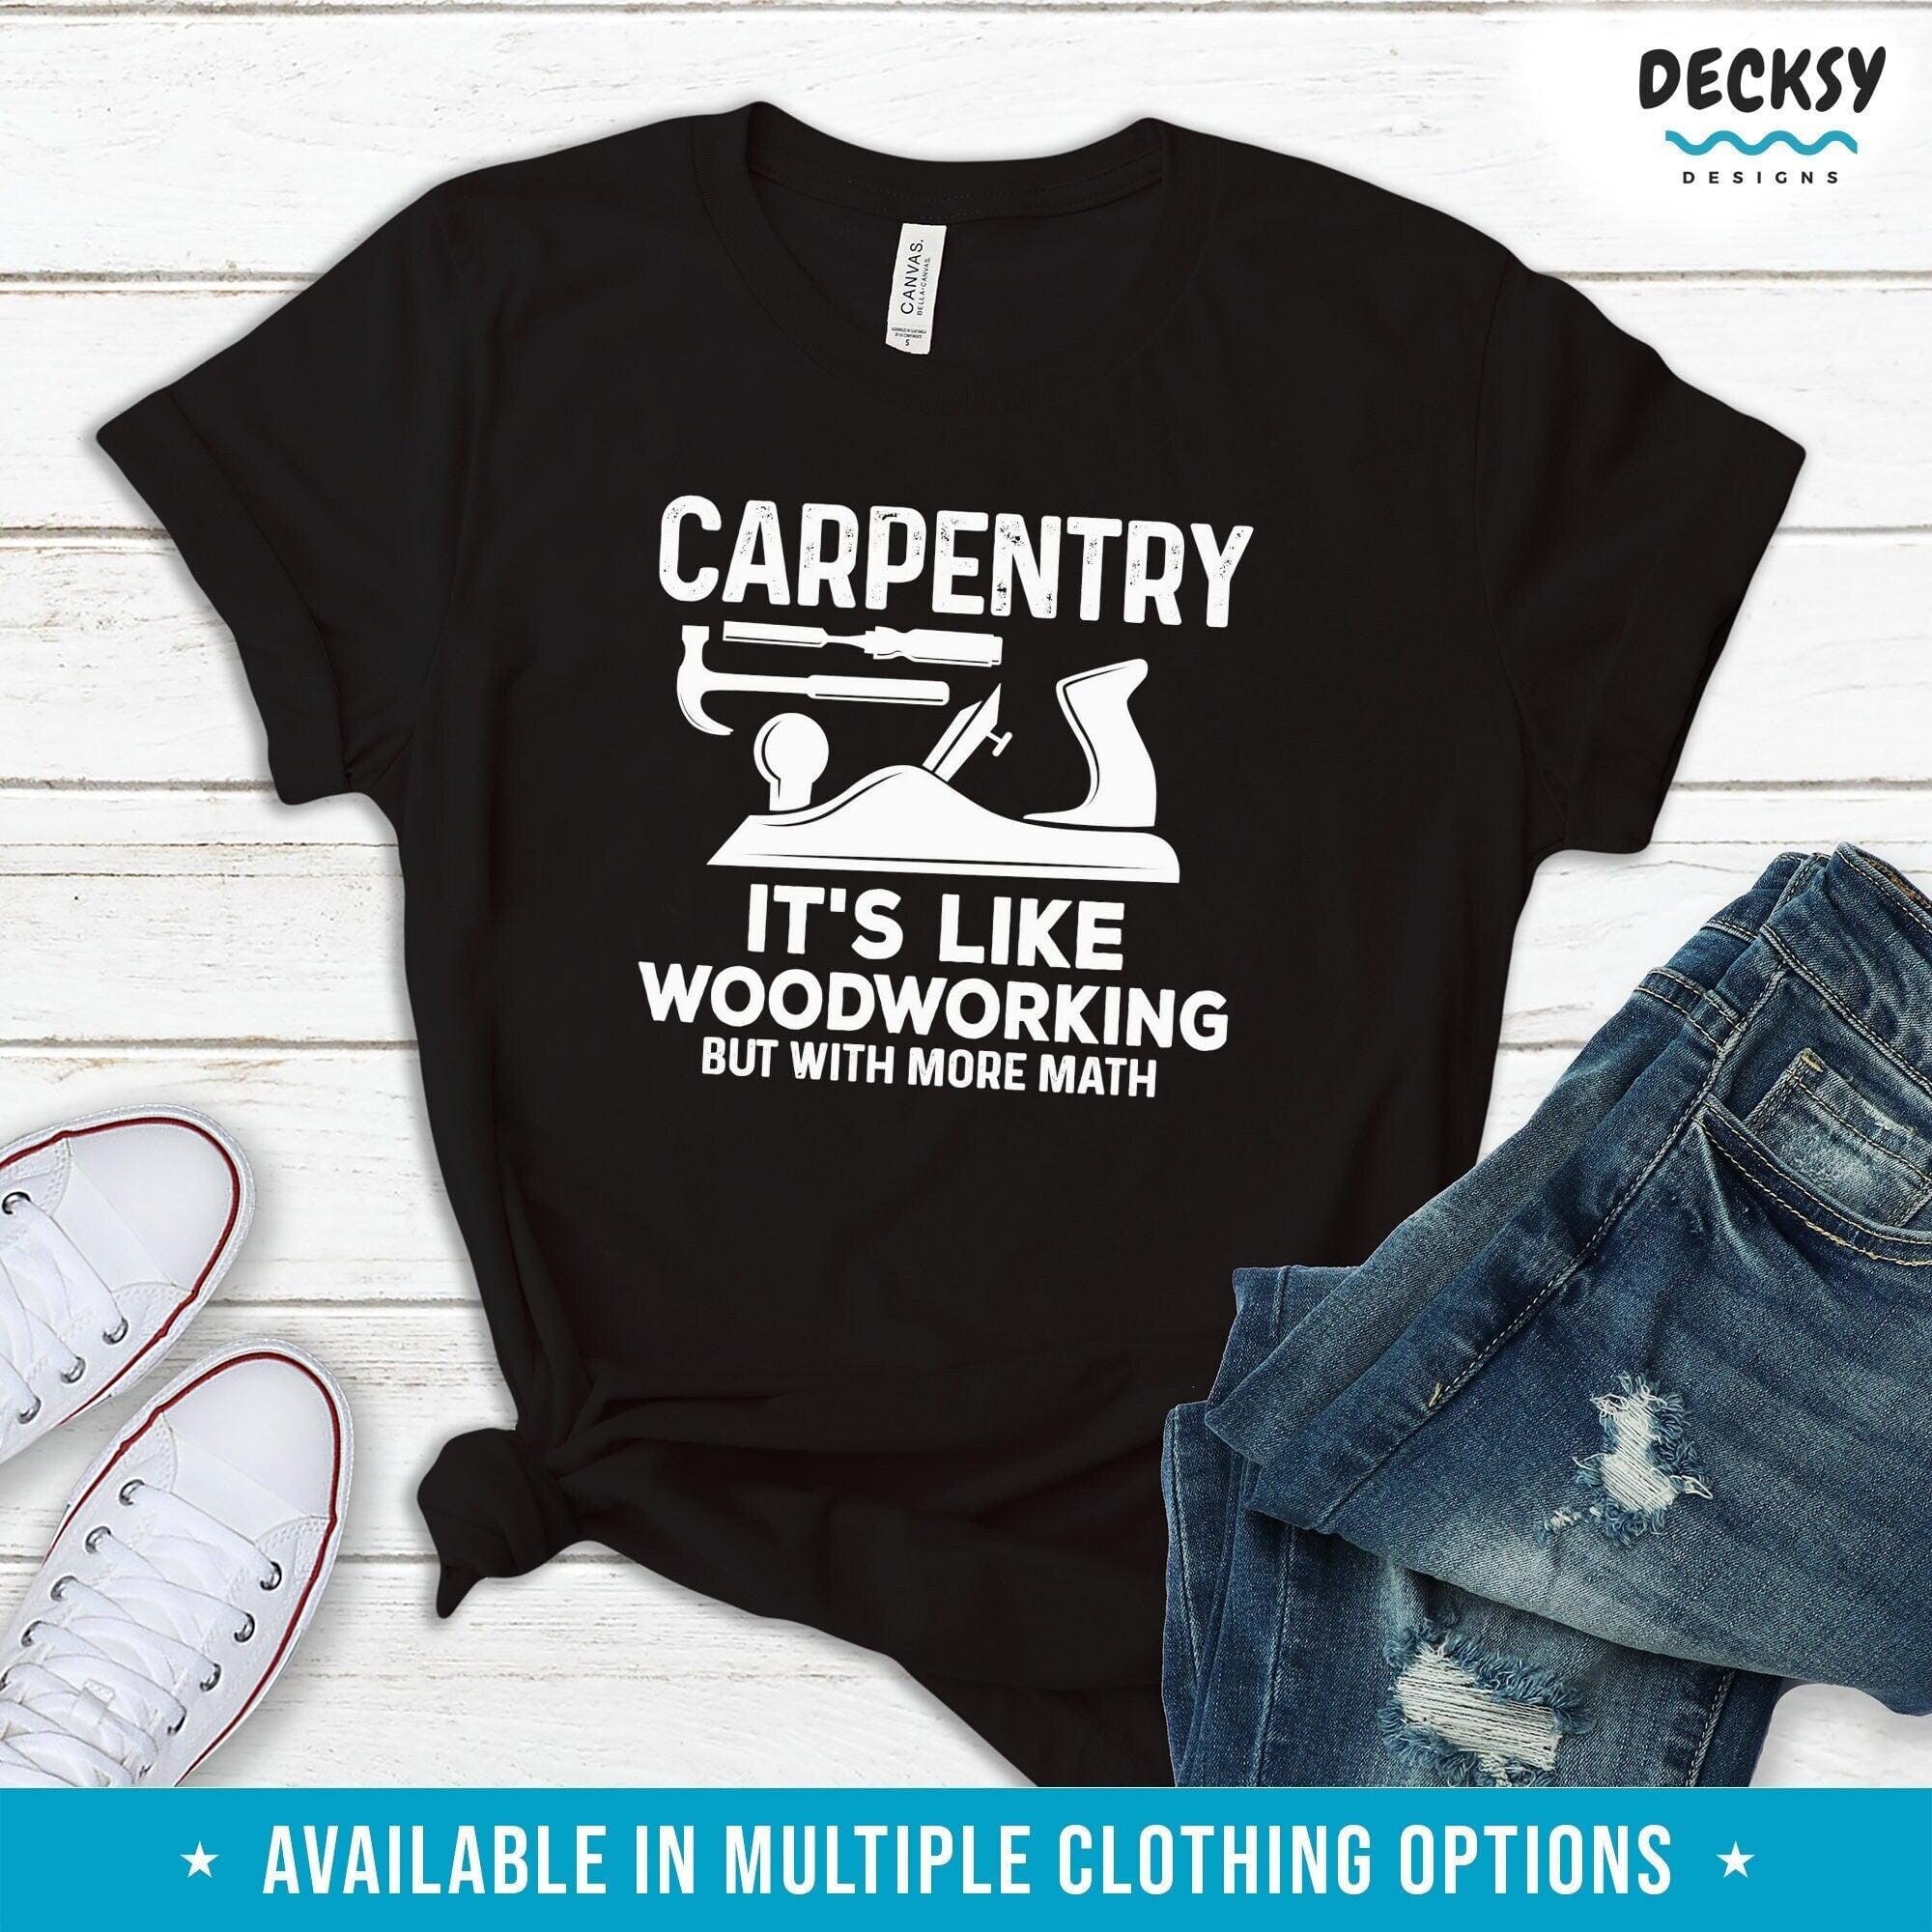 Carpenter Shirt, Woodworker Gift-Clothing:Gender-Neutral Adult Clothing:Tops & Tees:T-shirts:Graphic Tees-DecksyDesigns